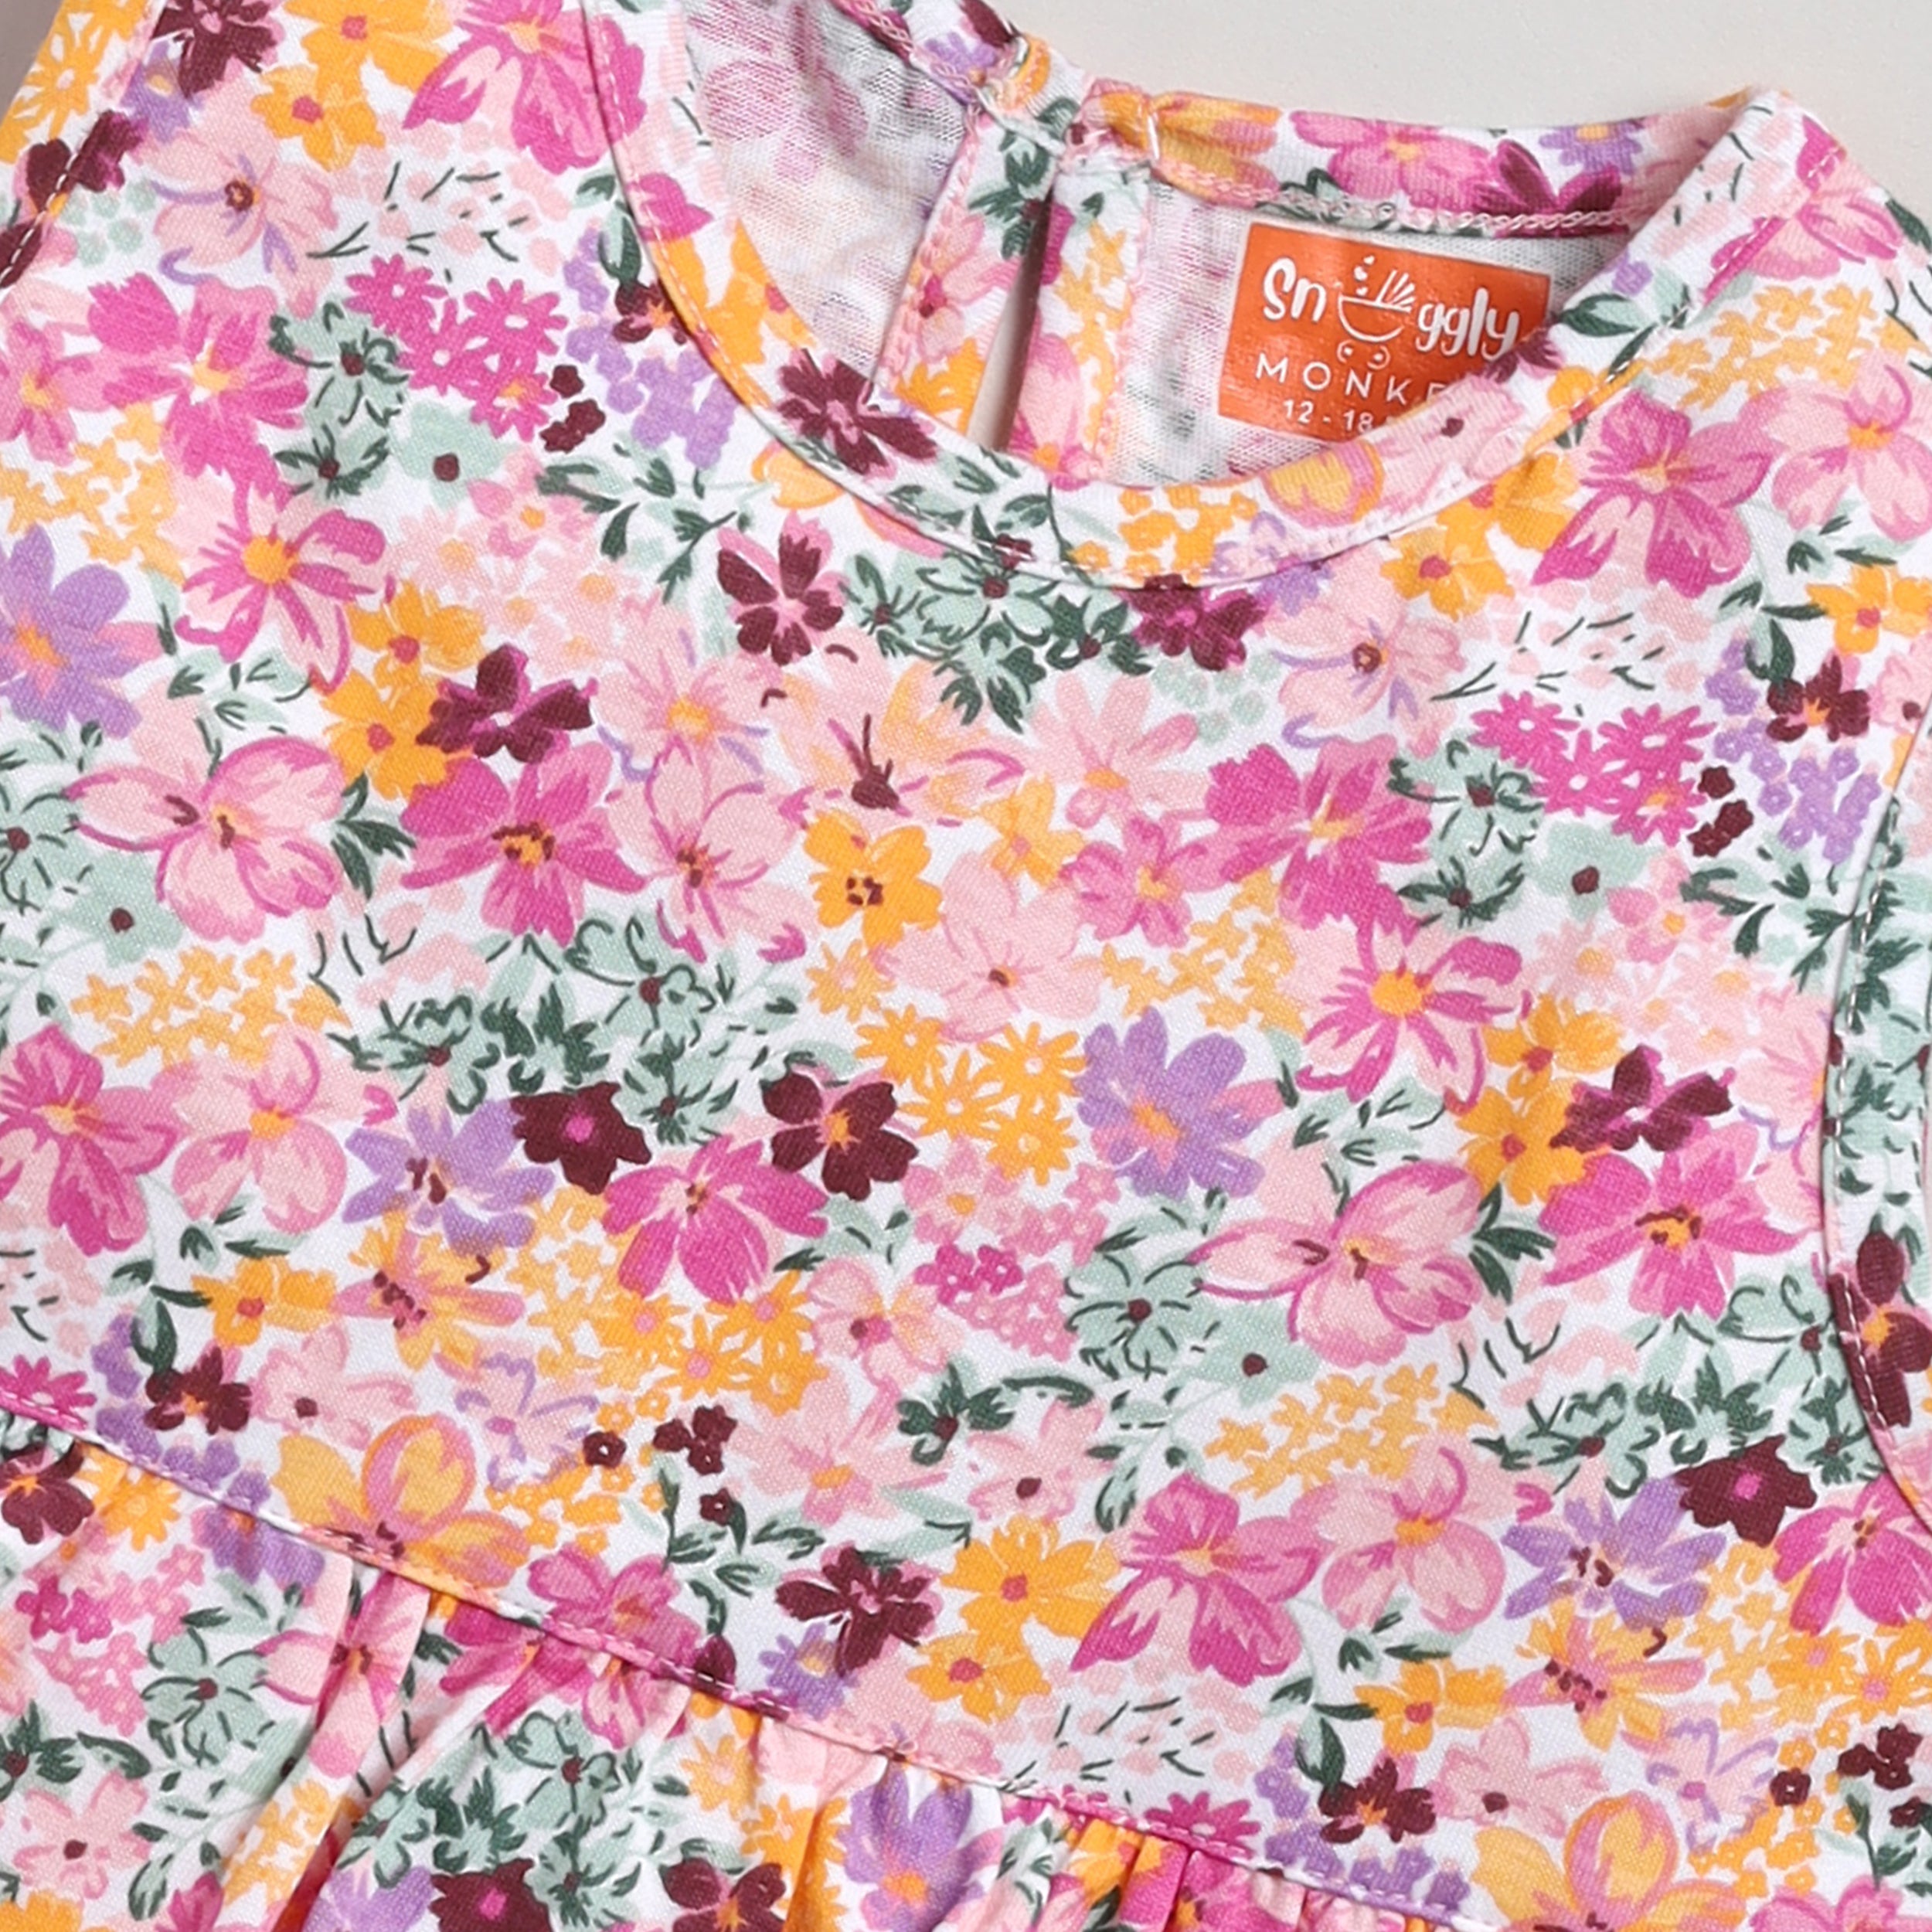 Snuggly Monkey Girls Floral Print Frock With Shrug